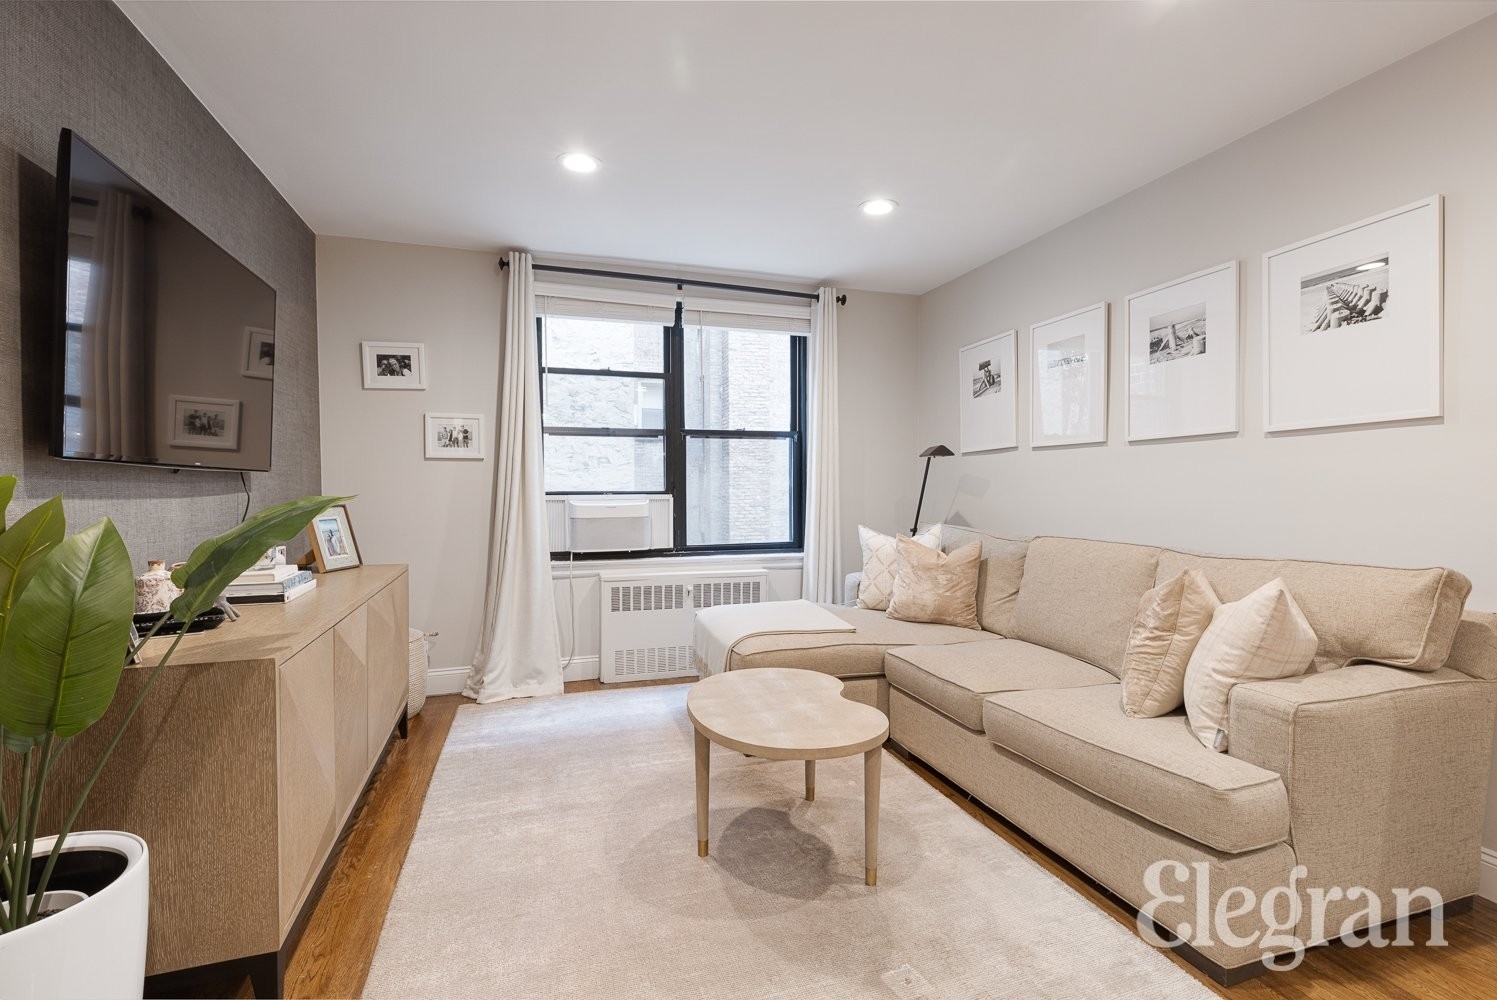 Co-op Properties for Sale at 81 BEDFORD ST, 2E West Village, New York, New York 10014